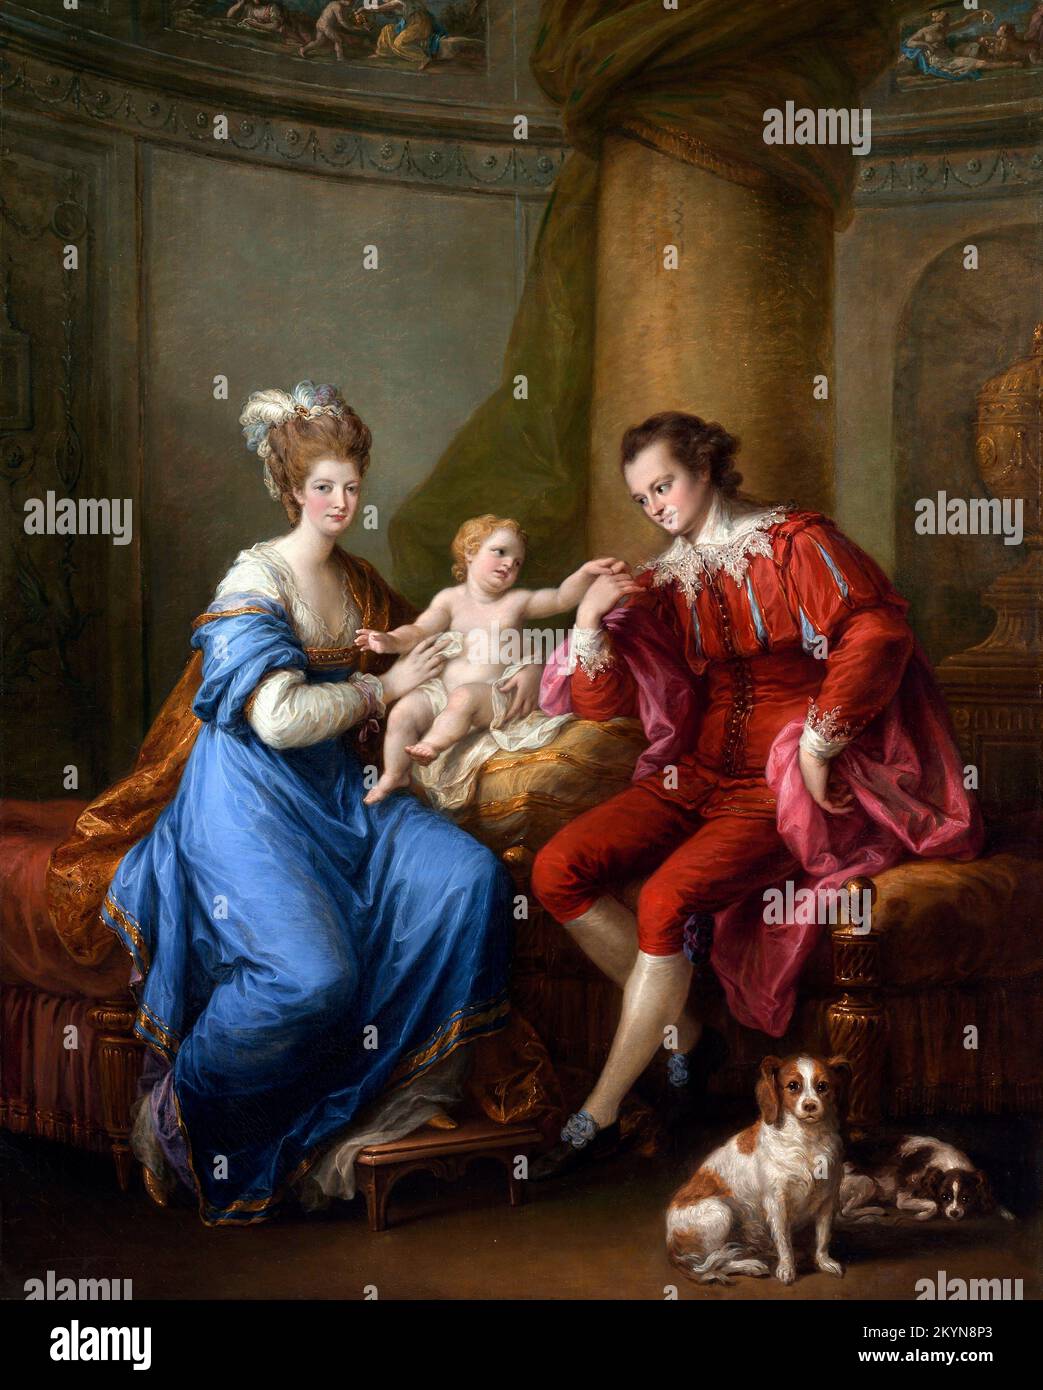 Edward Smith Stanley, Twelfth Earl of Derby, with His First Wife (Lady Elizabeth Hamilton) and Their Son (Edward Smith Stanley) by the Swiss painter, Angelica Kauffmann (1741-1807), oil on canvas, c. 1776 Stock Photo